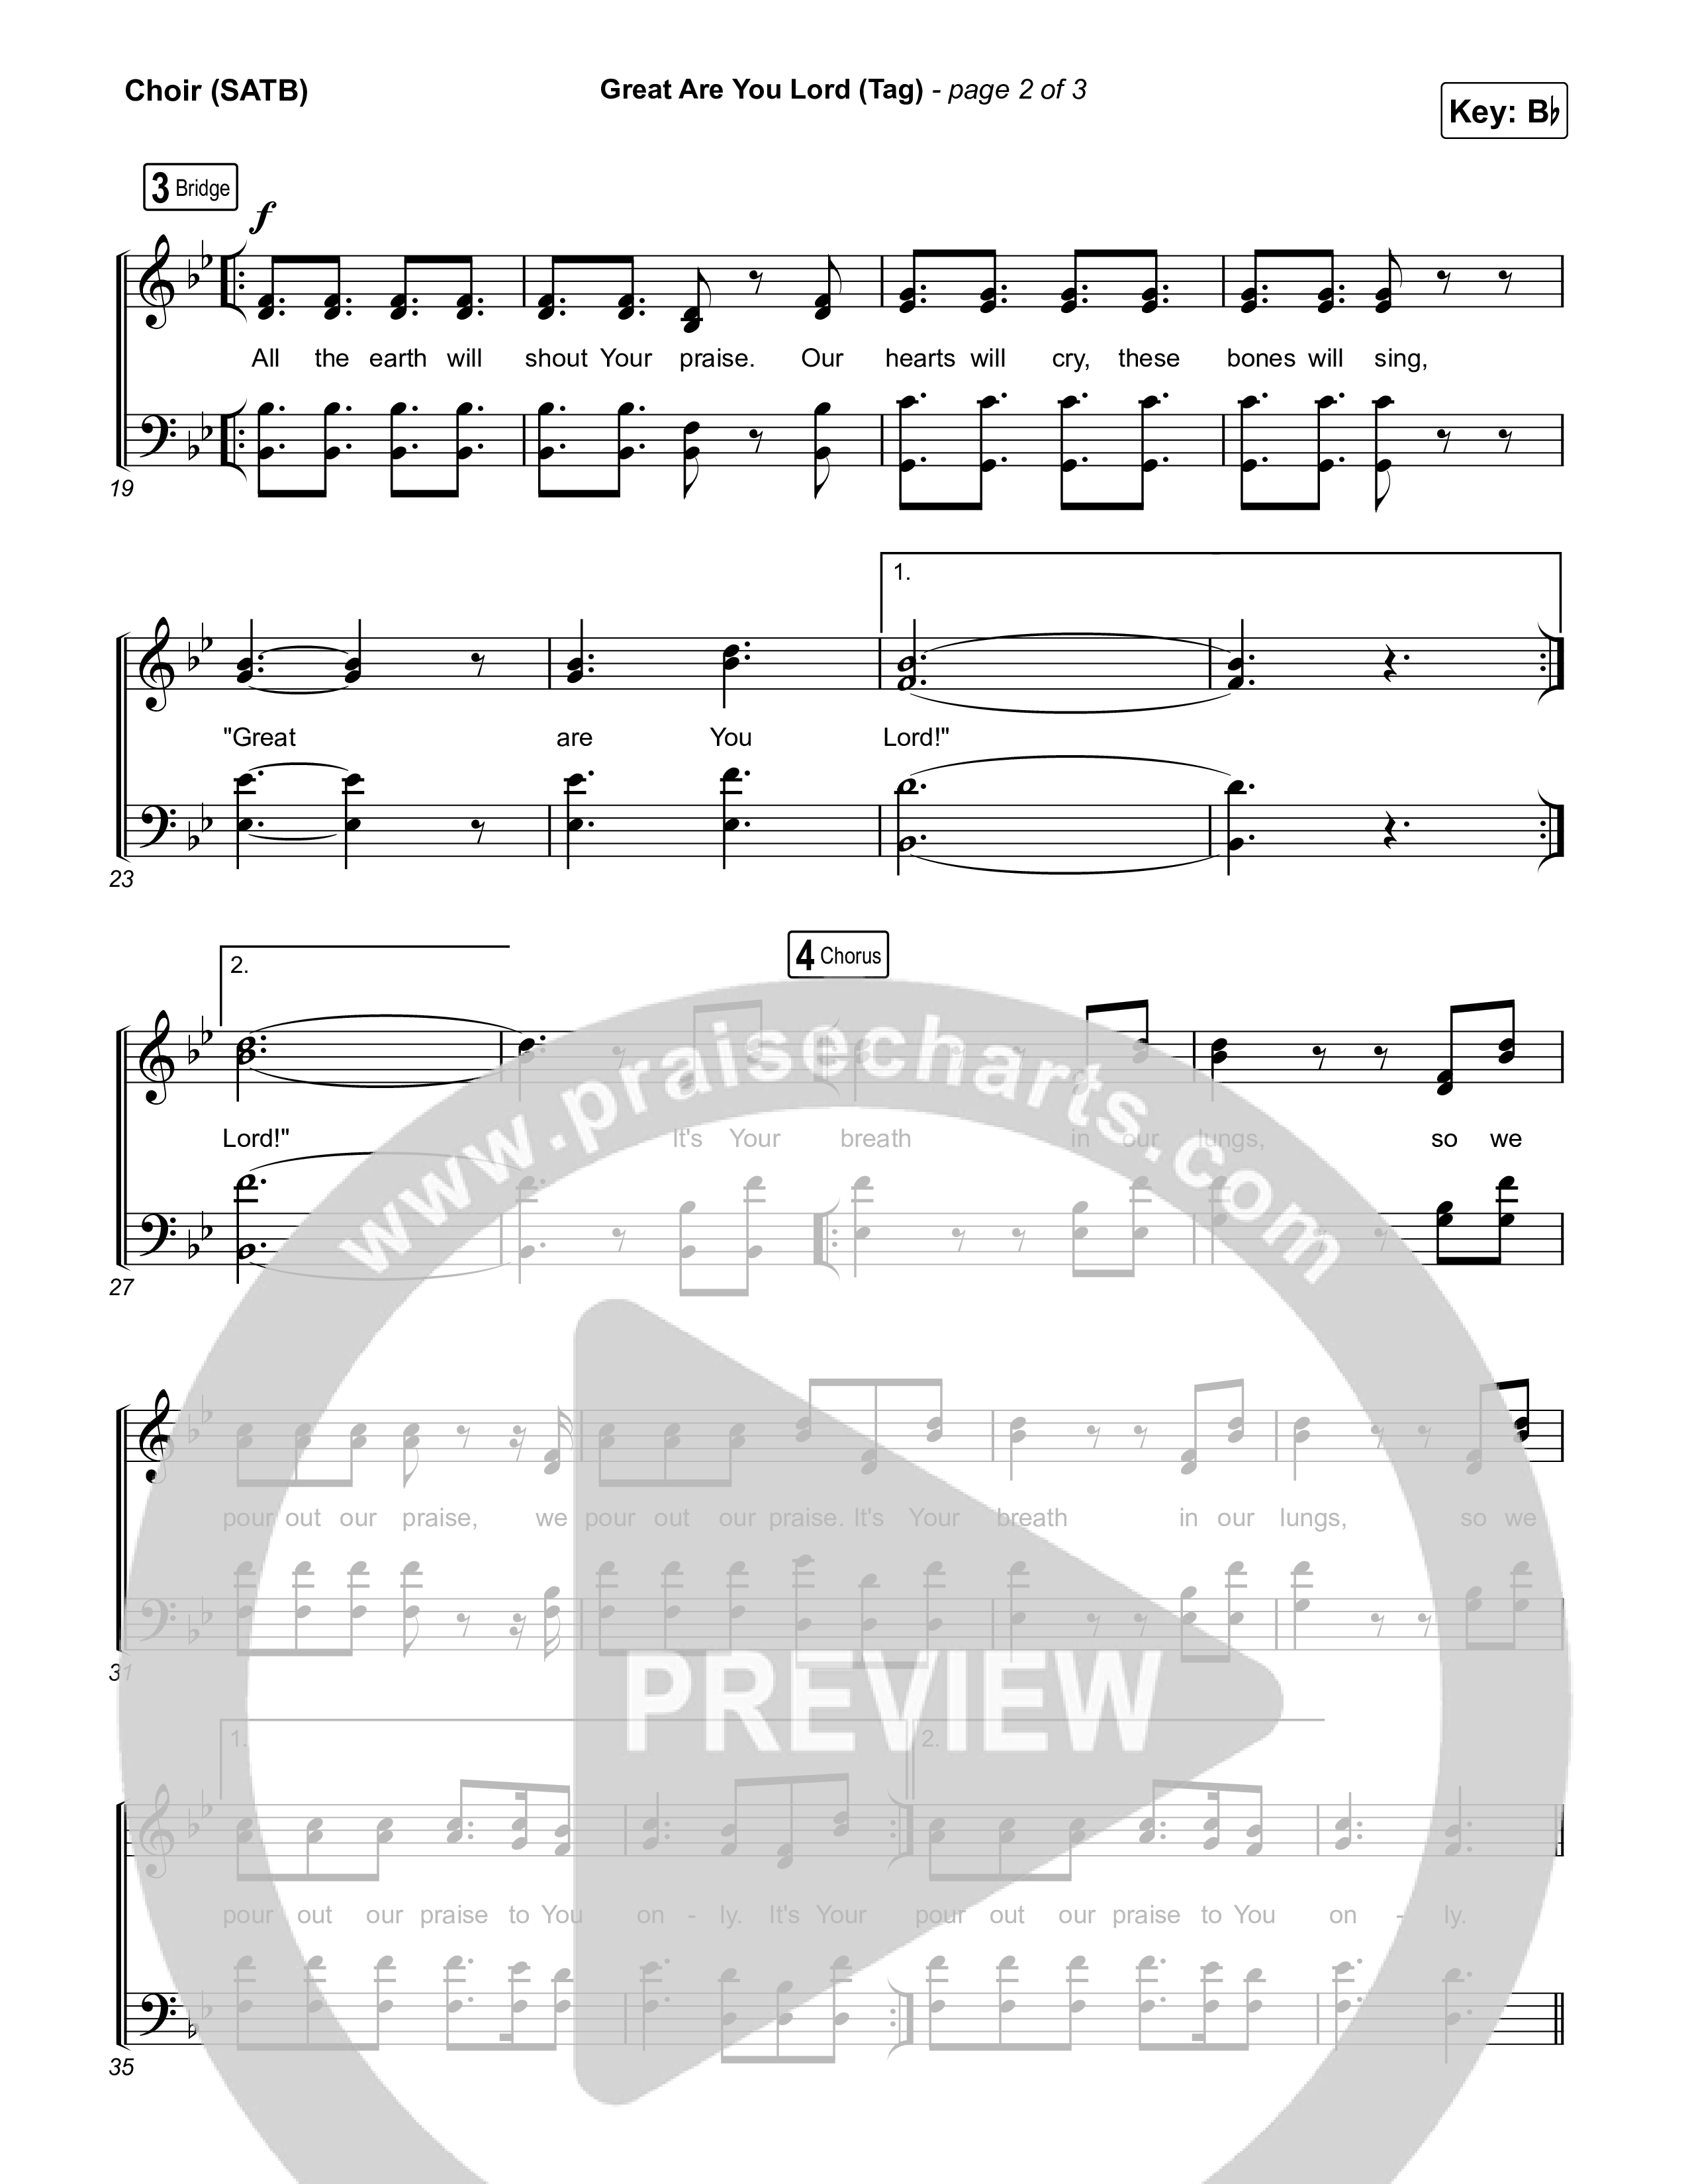 Great Are You Lord (Live) Choir Sheet (SATB) (Cody Carnes)